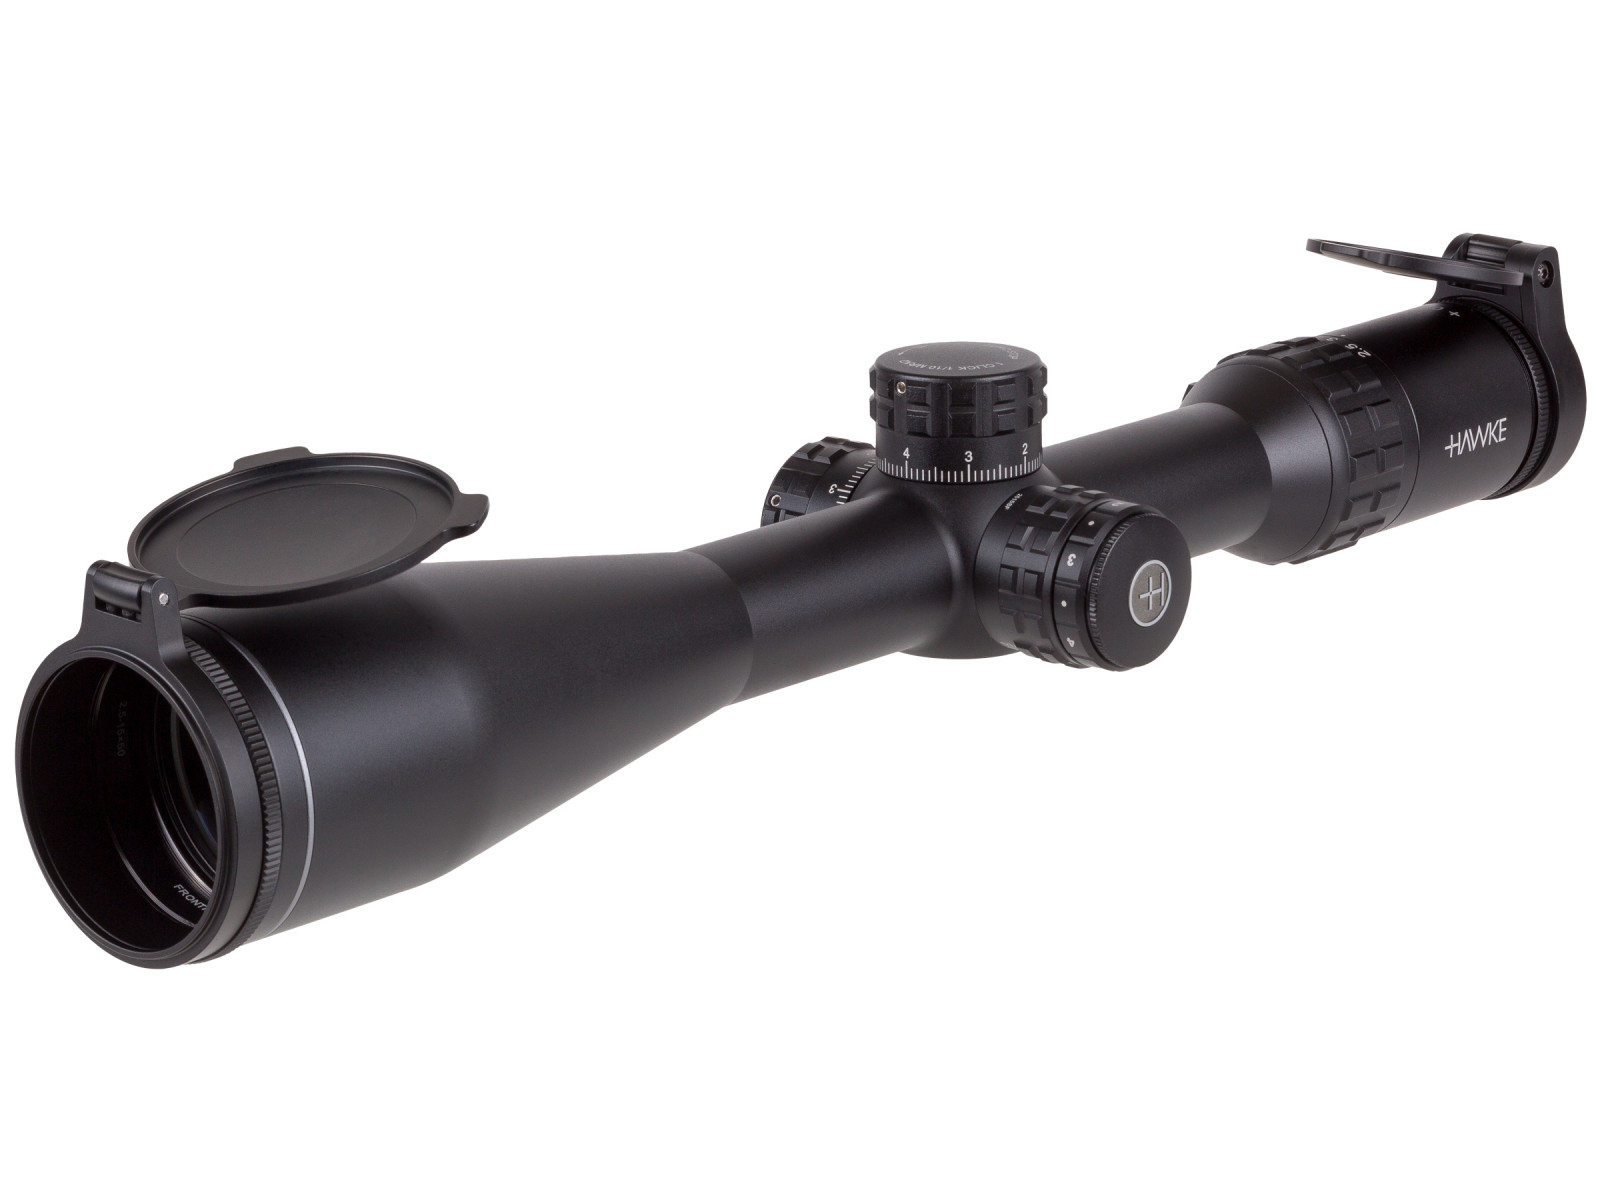 Refurbished Hawke Frontier 30 SF 2.5-15x50 AO Rifle Scope, MIL PRO Reticle, 1/10 MRAD, 30mm Tube